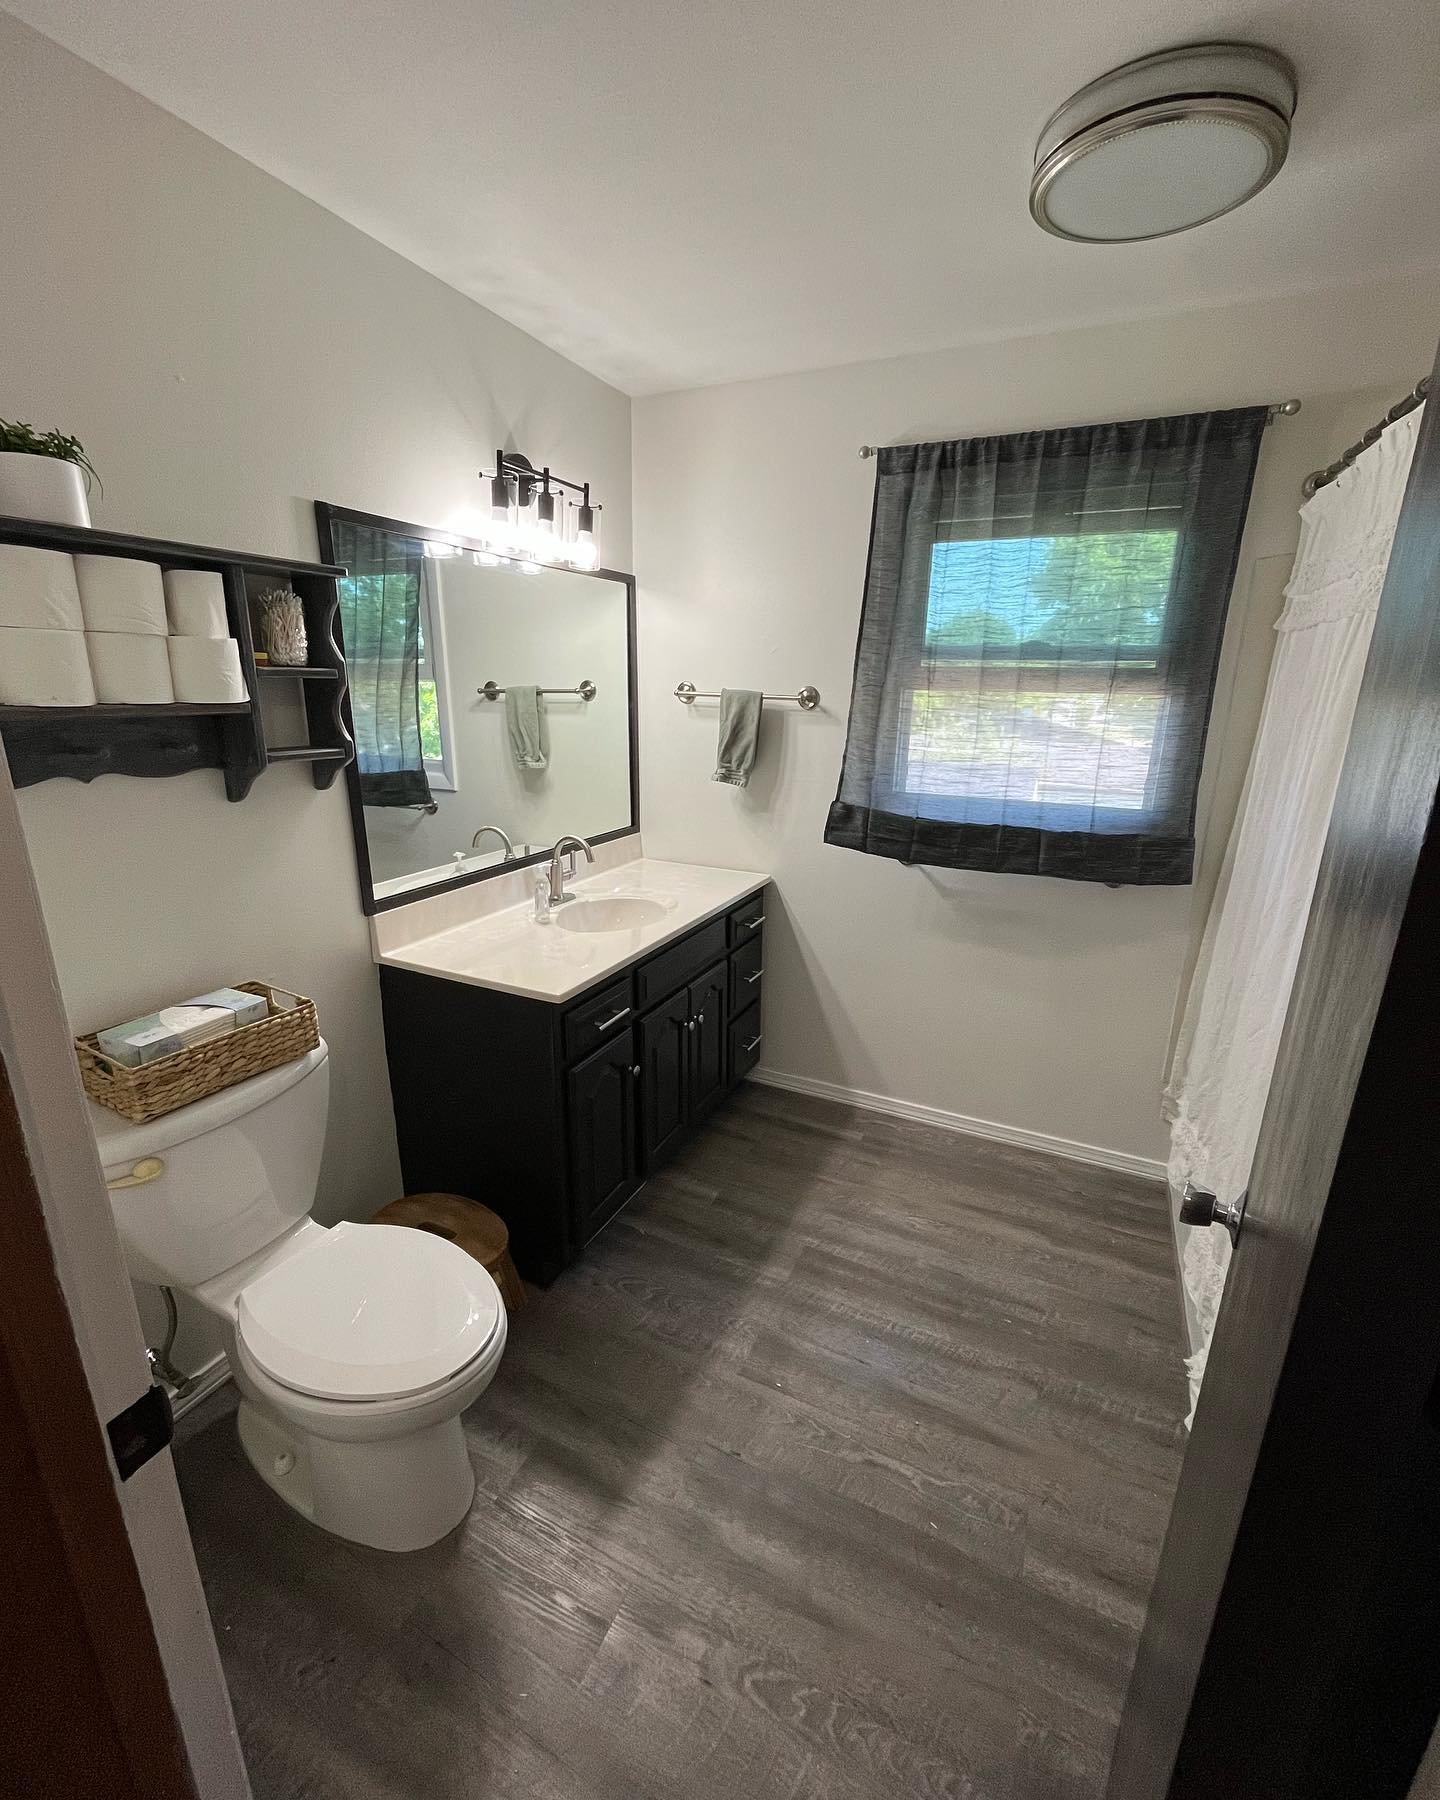 It rained really hard this week so I was trapped inside and next thing you know this project happened! I had some fun and remodeled our kids bathroom for about $90 total. Whoo!

New flooring (I used 2 mm vinyl peel &amp; stock storm gray planks), Pai